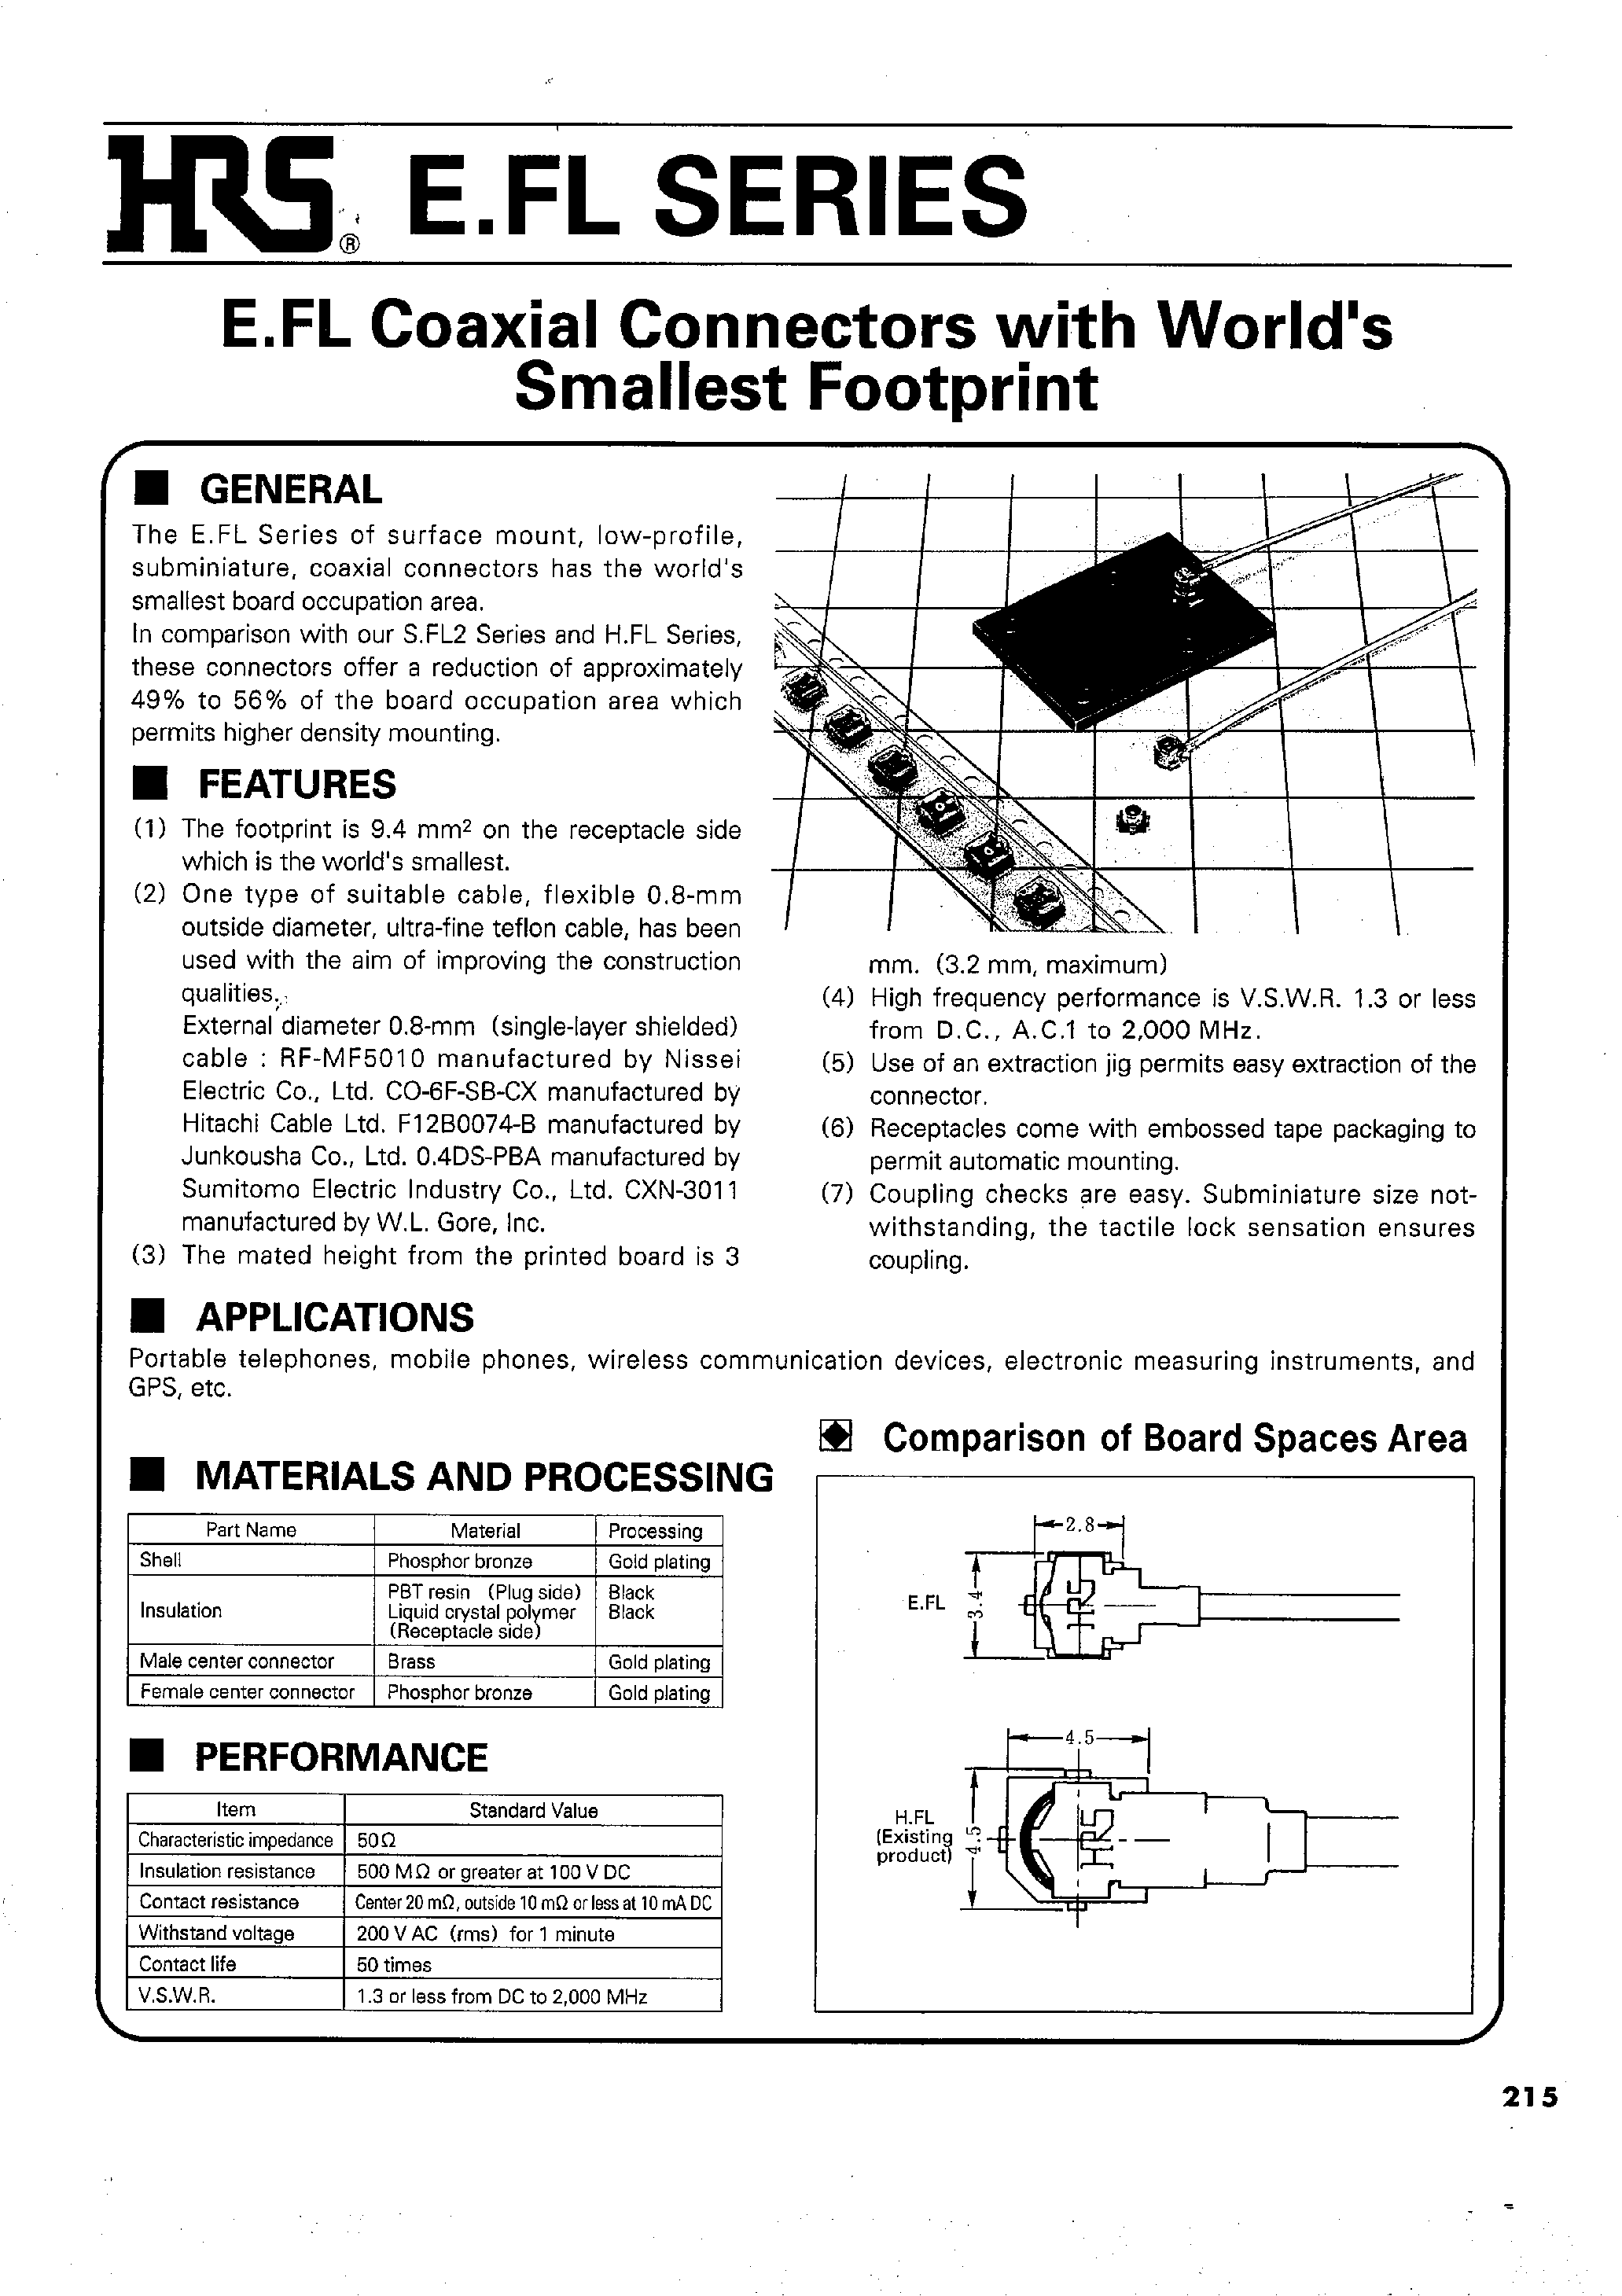 Datasheet E.FL-R-SMT - E.FL Coaxial Connectors with World Smallest Footprint page 1